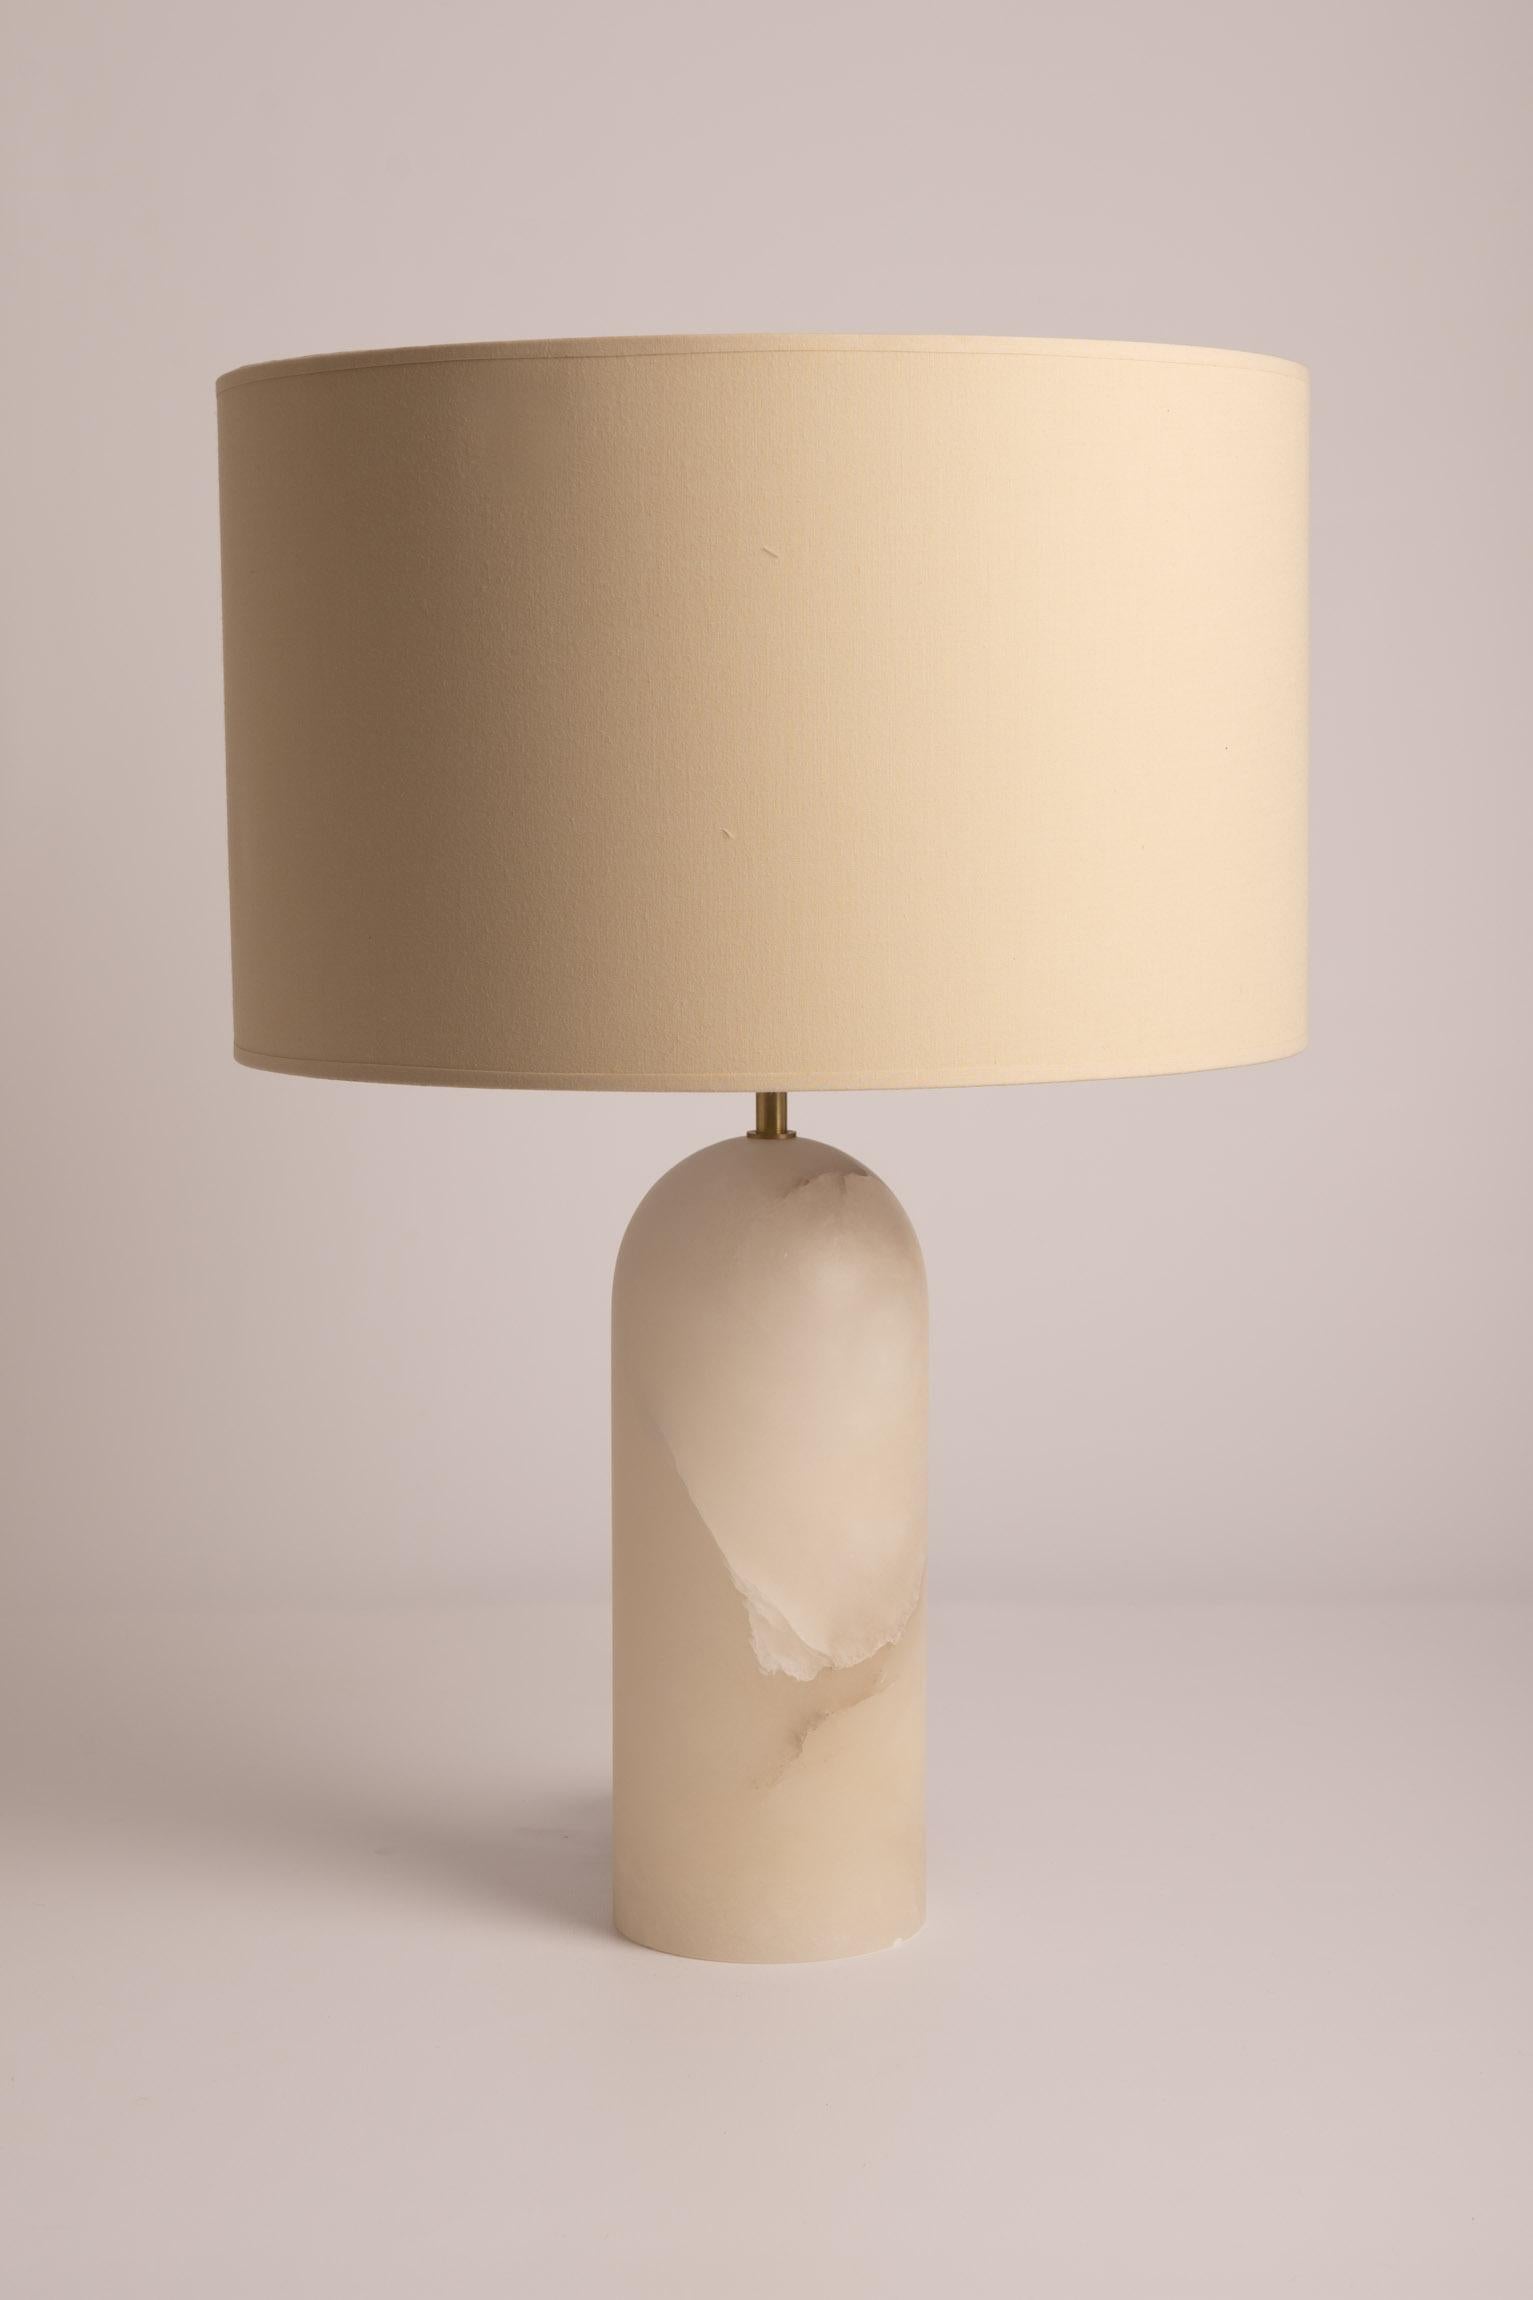 White Alabaster Pura Table Lamp by Simone & Marcel
Dimensions: Ø 40 x H 58 cm.
Materials: Brass, cotton and white alabaster.

Also available in different marble, wood and alabaster options and finishes. Custom options available on request. Please